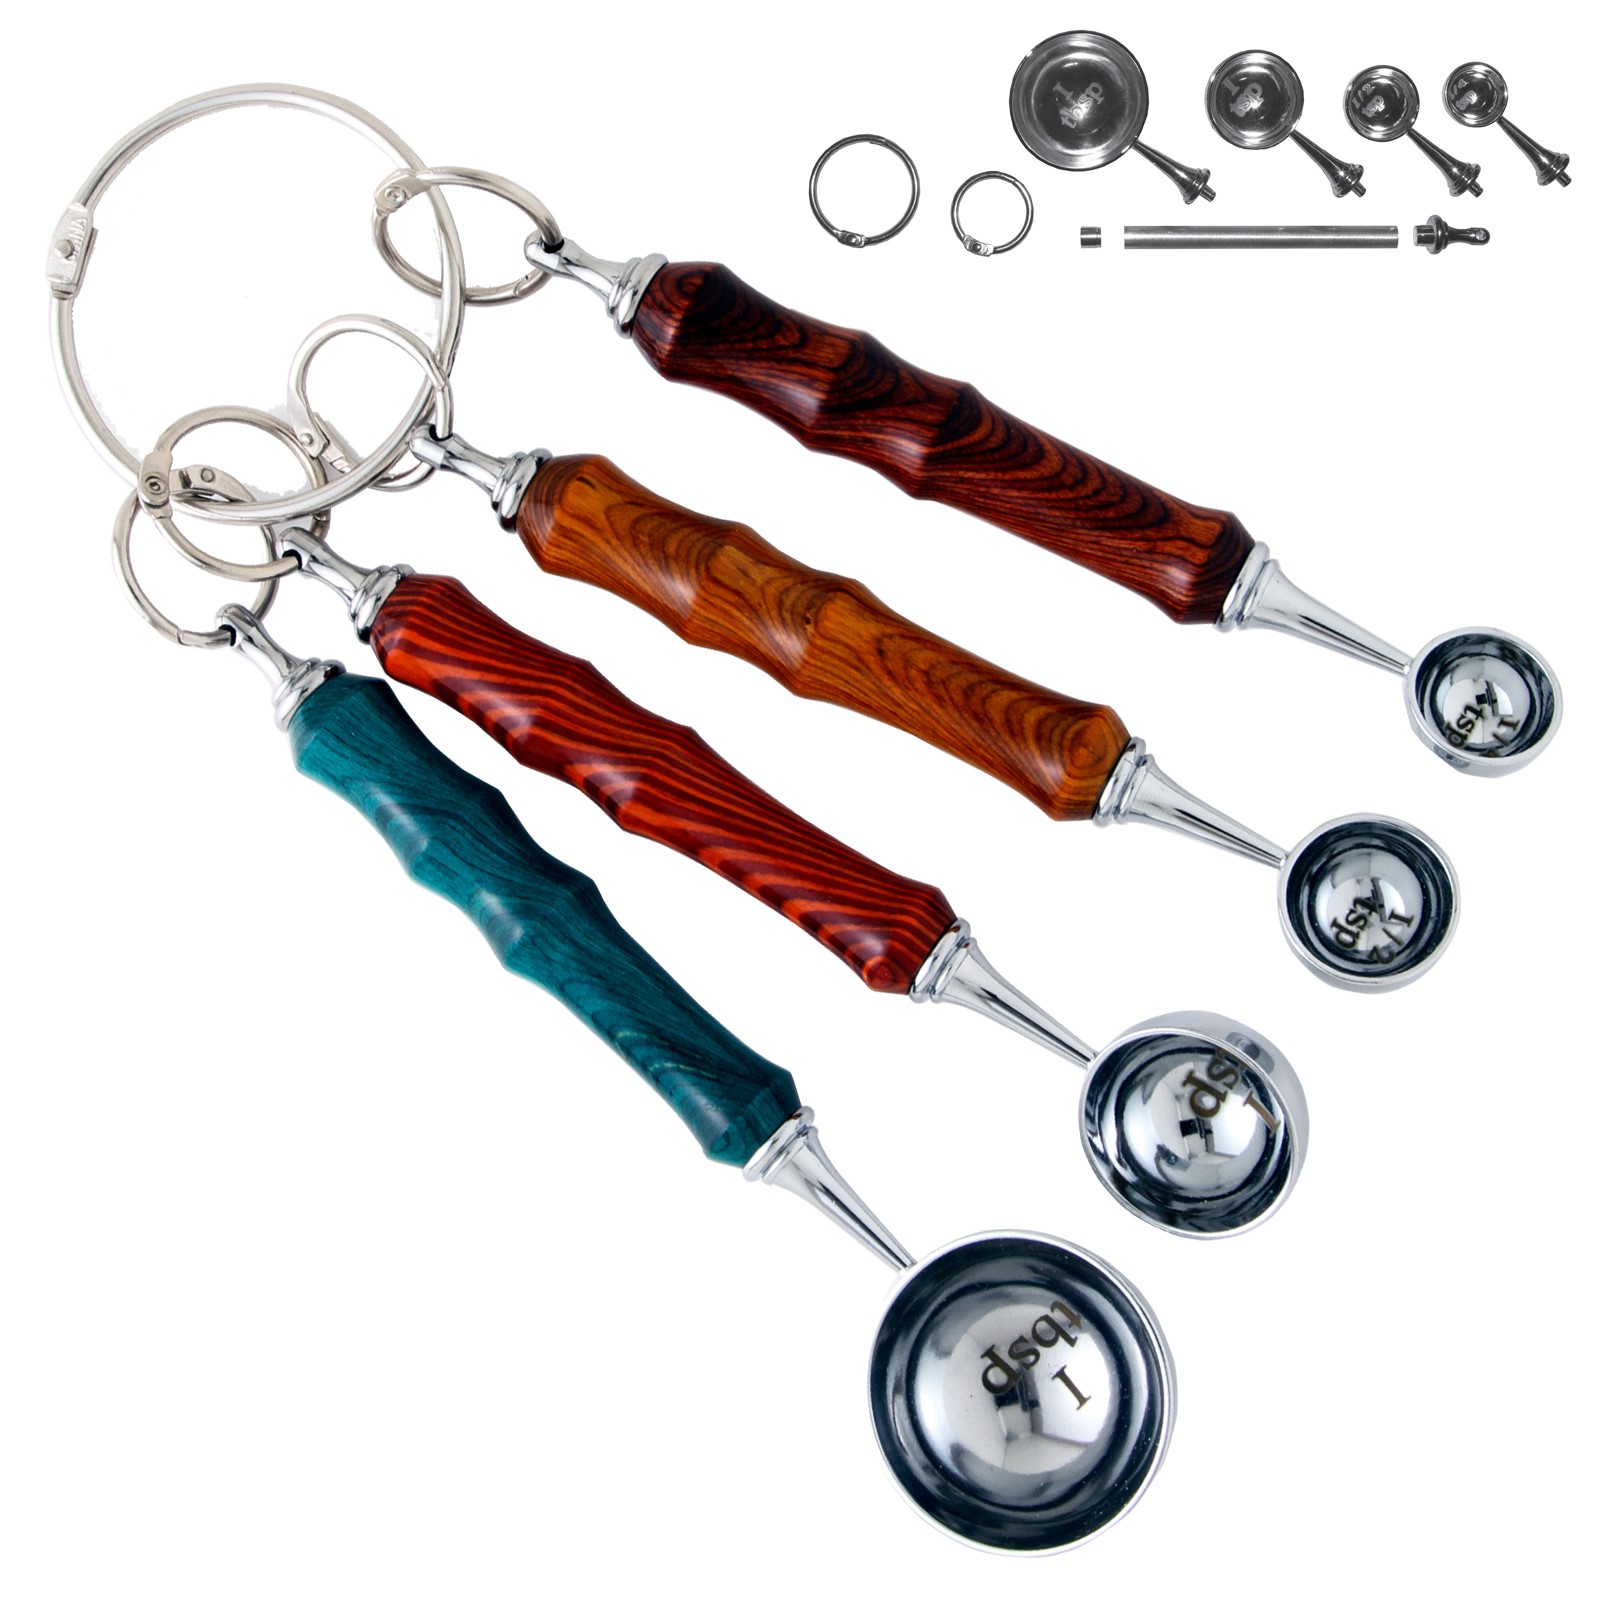 4-PC Measuring Spoon Set, Accessories: National Hospitality Supply